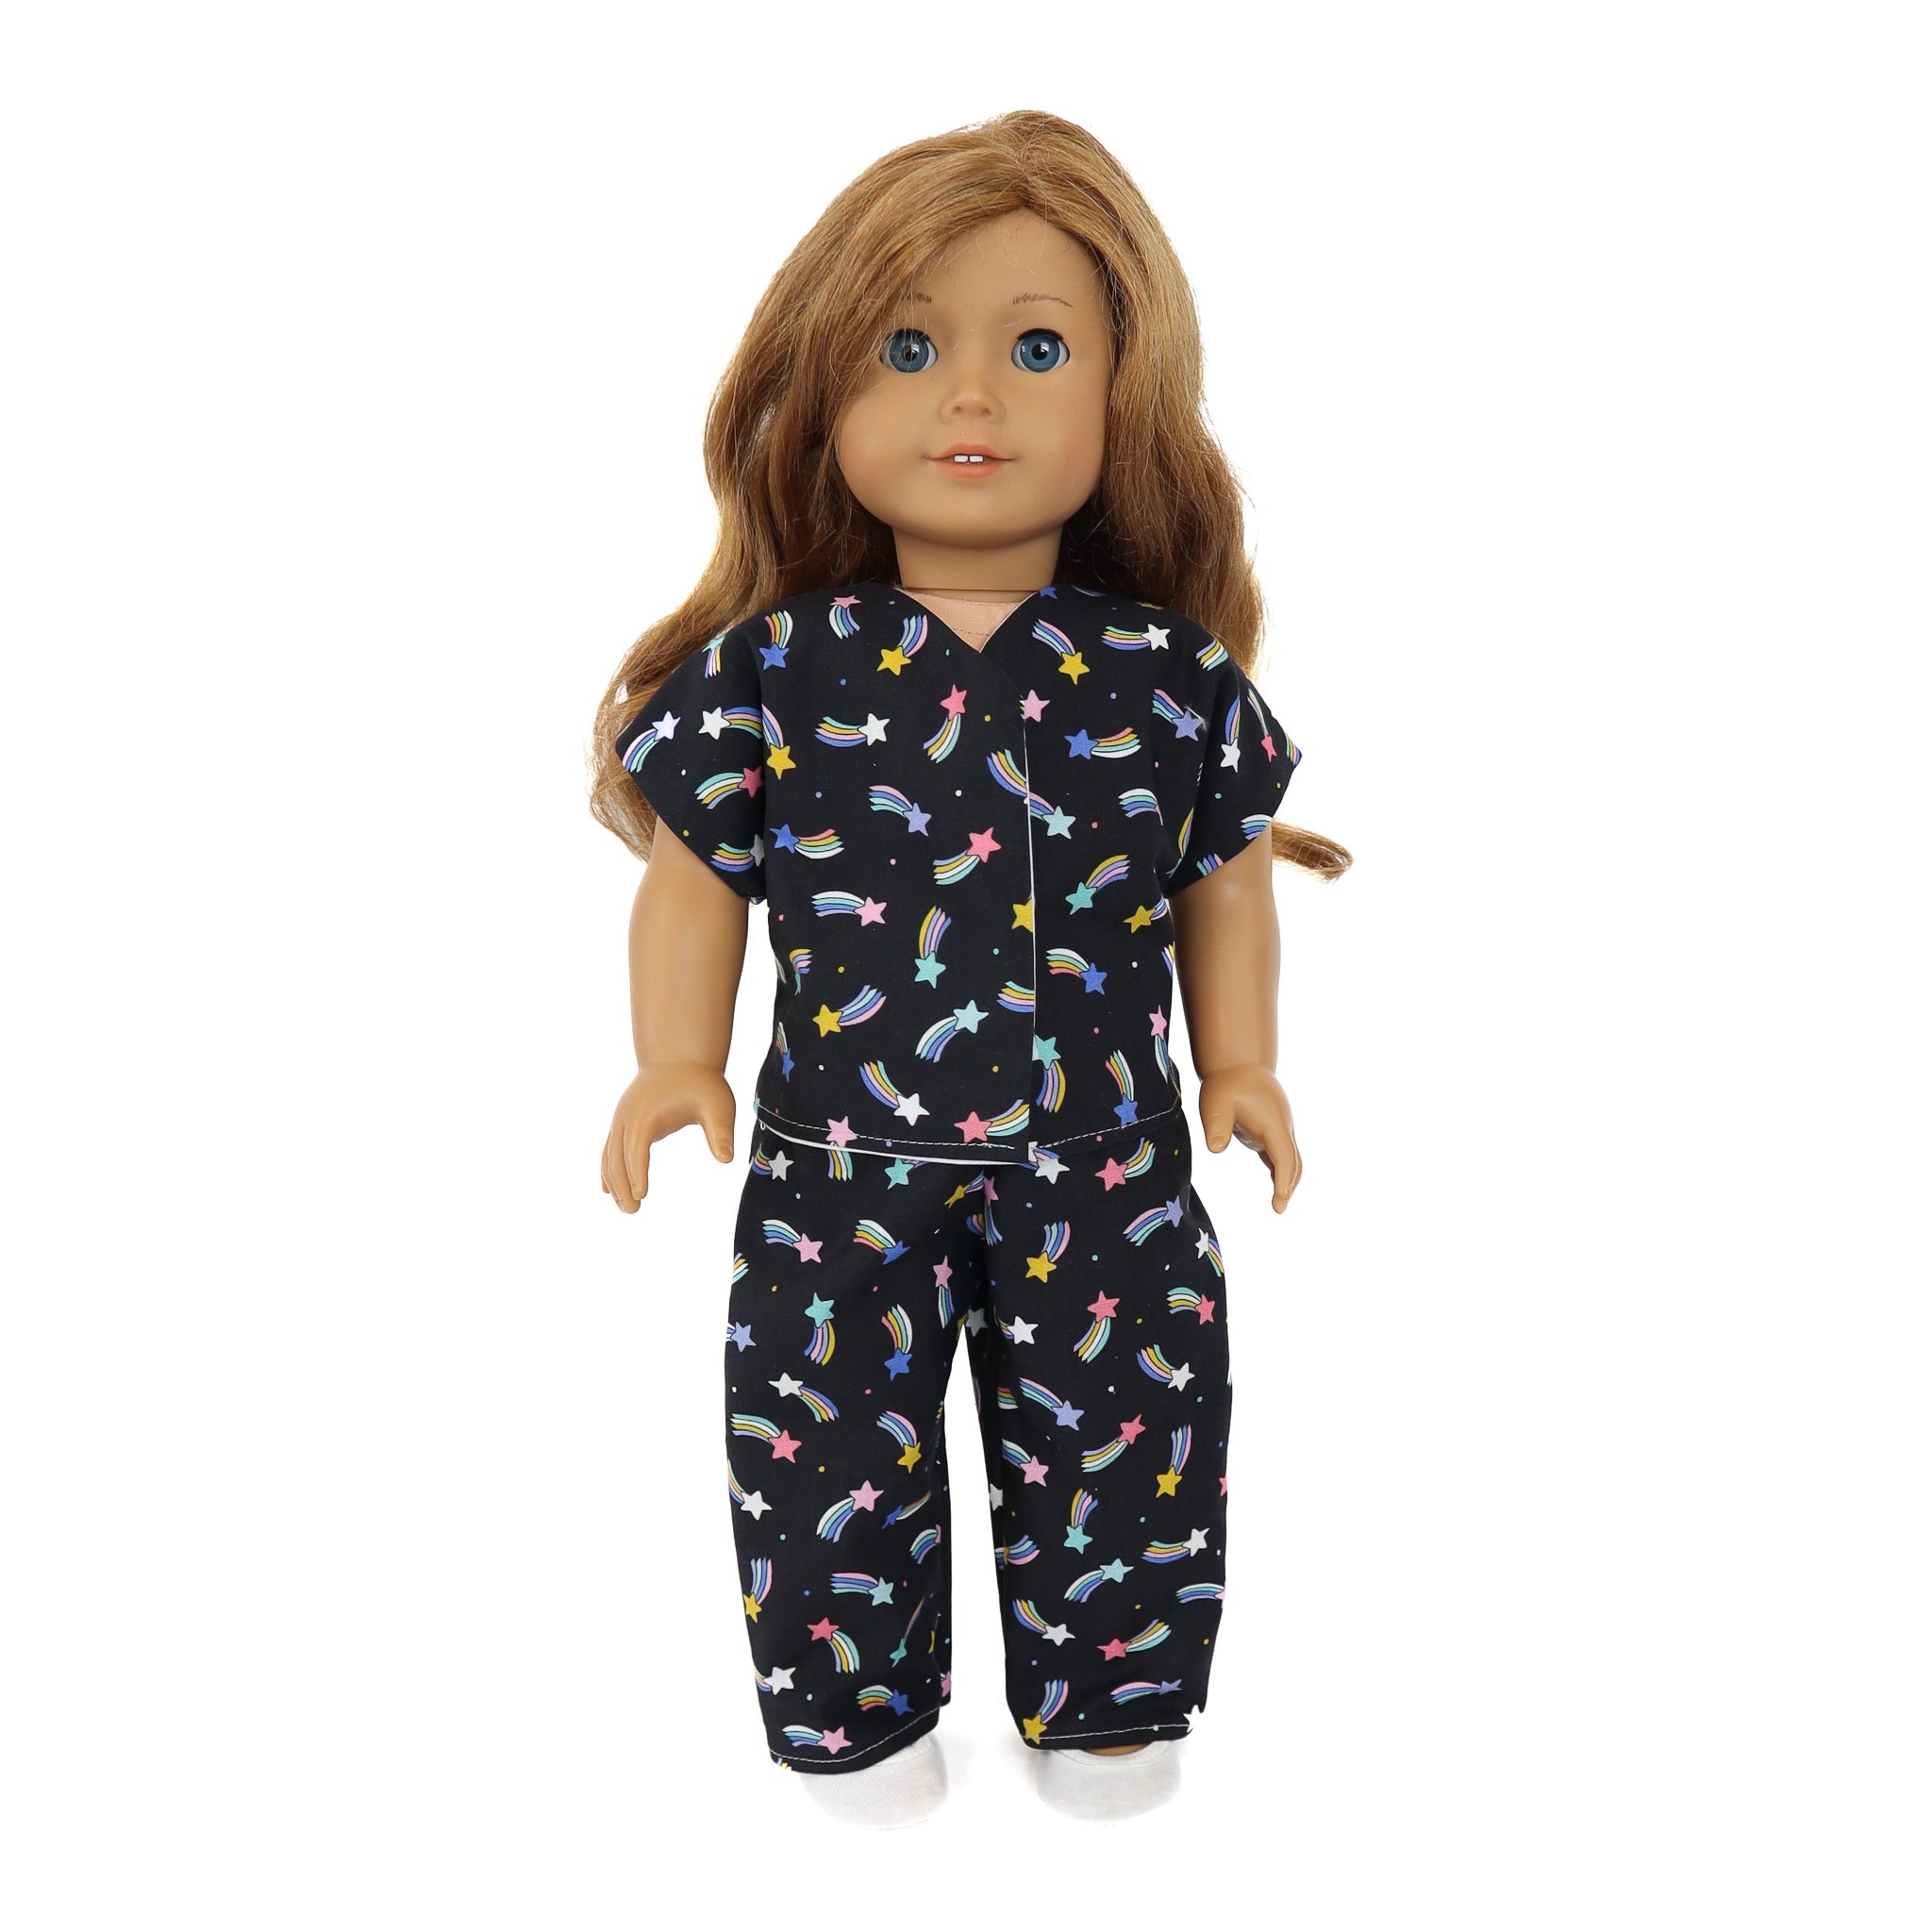 Early Bird Pajamas, Outfit for 18-inch Dolls